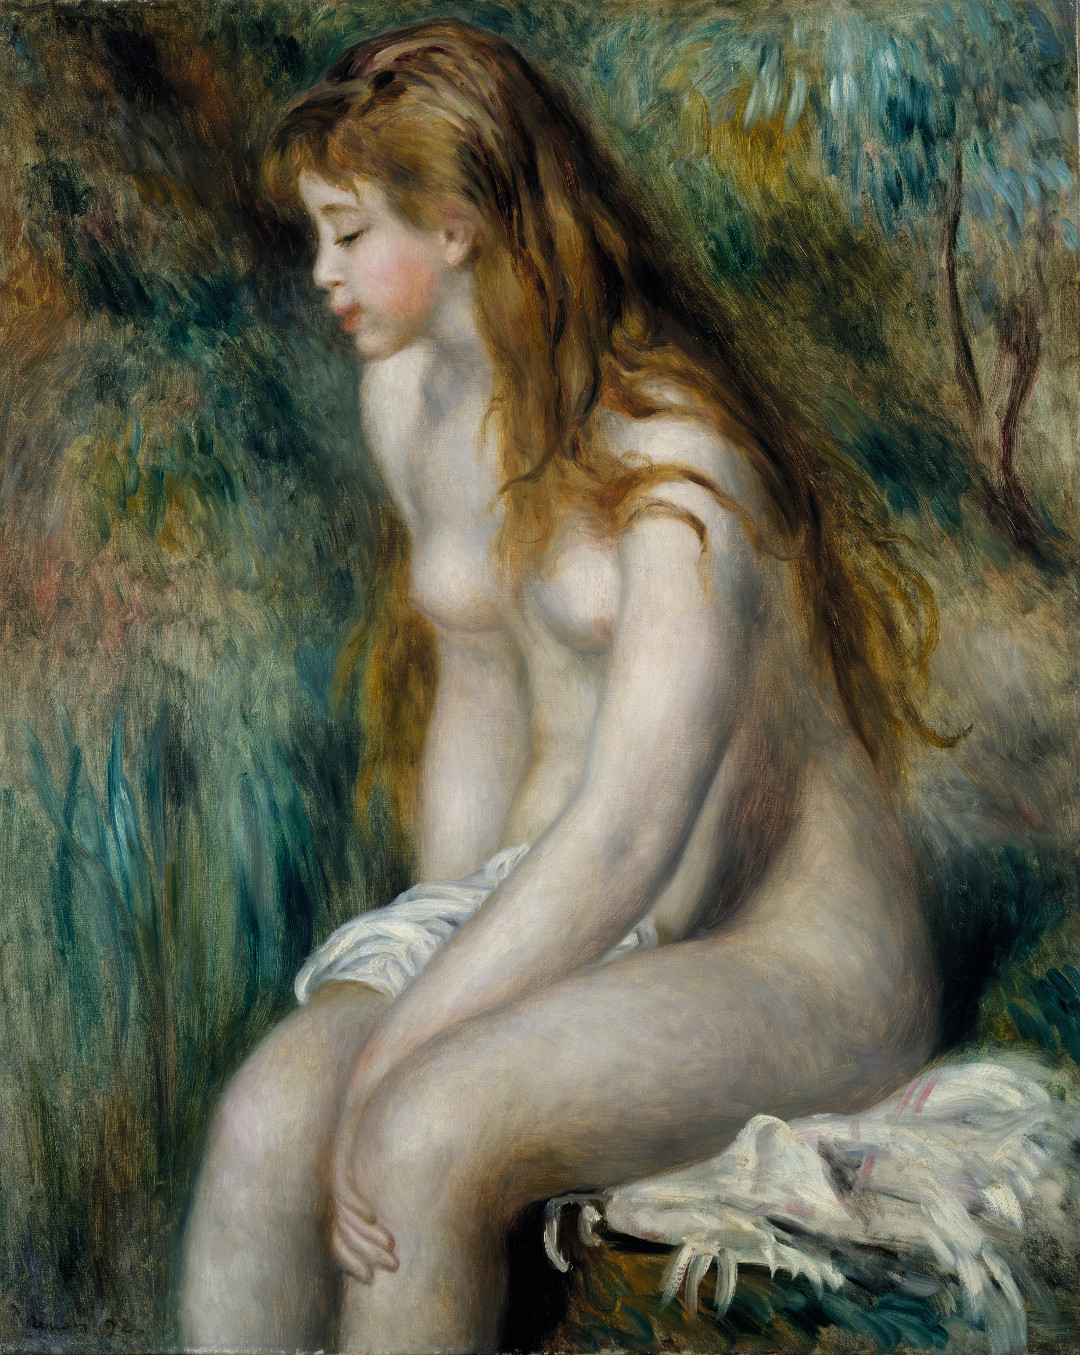 Pierre-Auguste Renoir, Young Girl Bathing, 1892, as reproduced in The Art of the Erotic